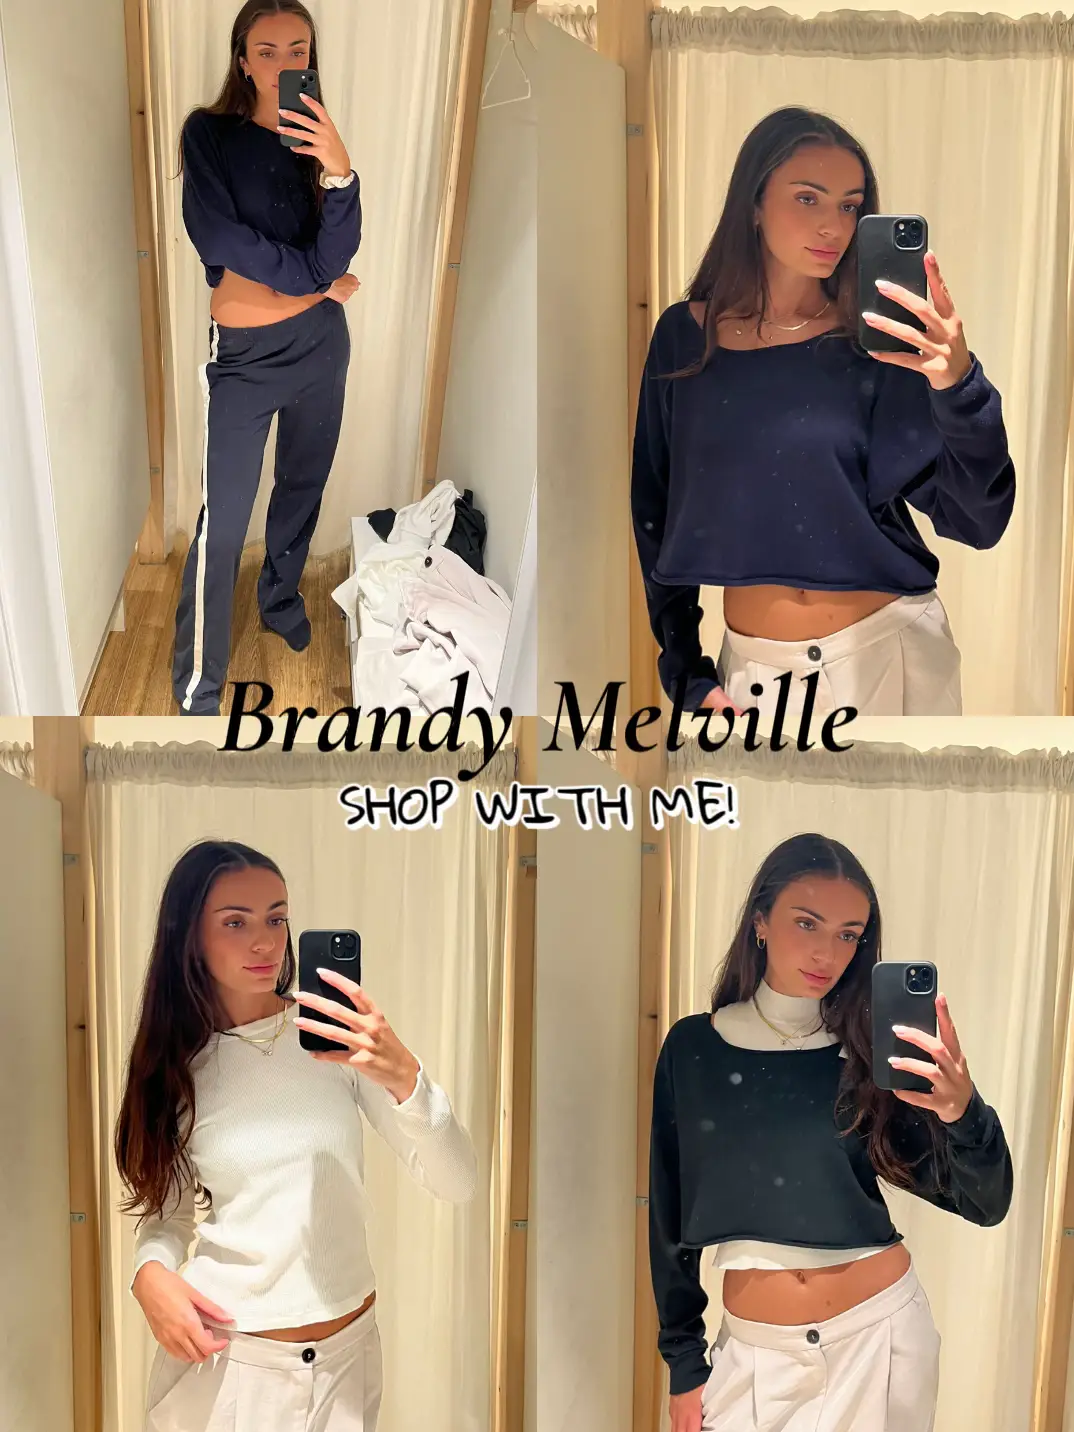 43. SHOP WITH ME at Brandy Melville, Gallery posted by ARIANE